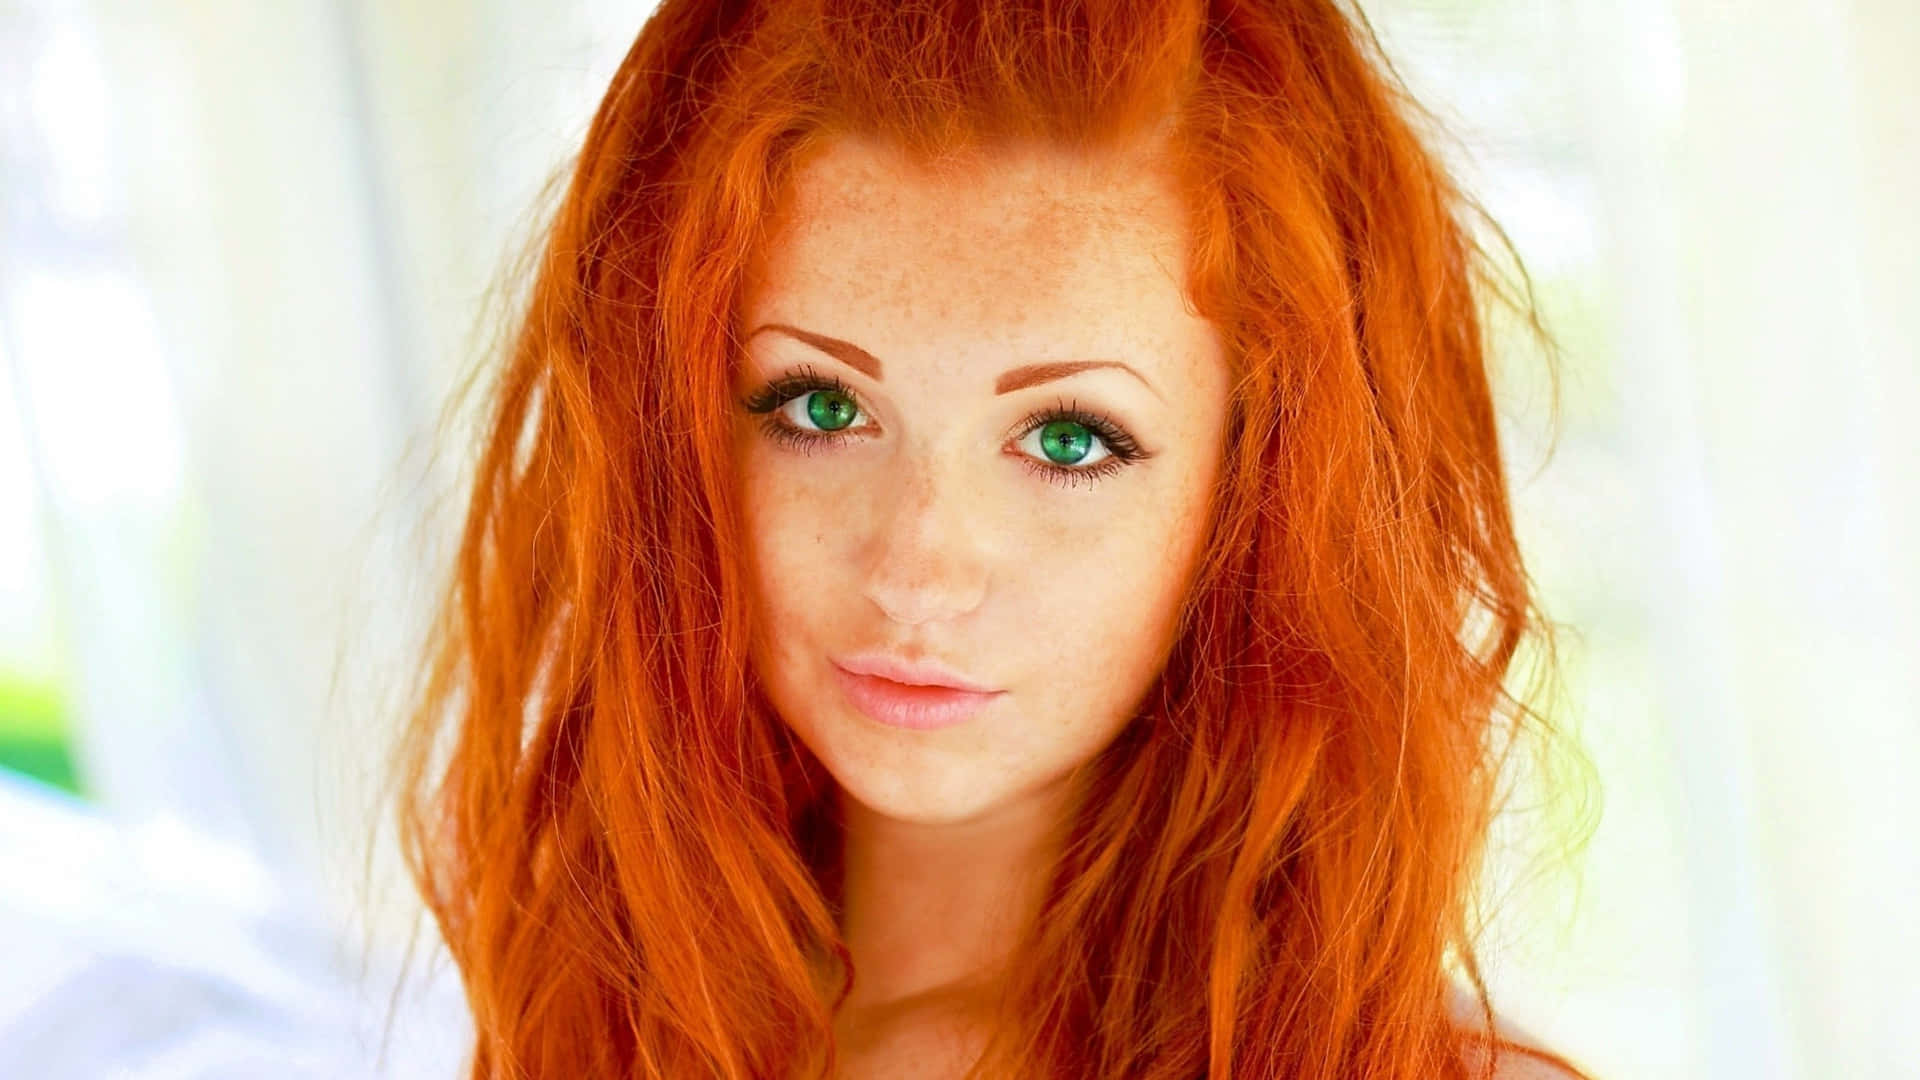 Download Redhead Girl With Green Eyes Wallpaper 